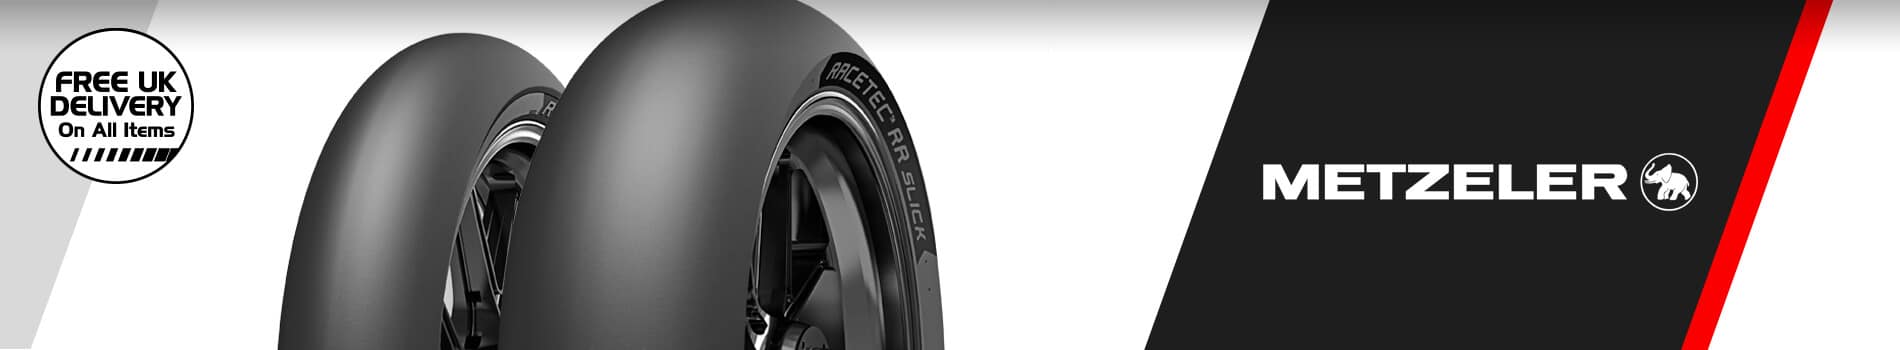 Metzeler Motorcycle Tyres - Free UK Delivery